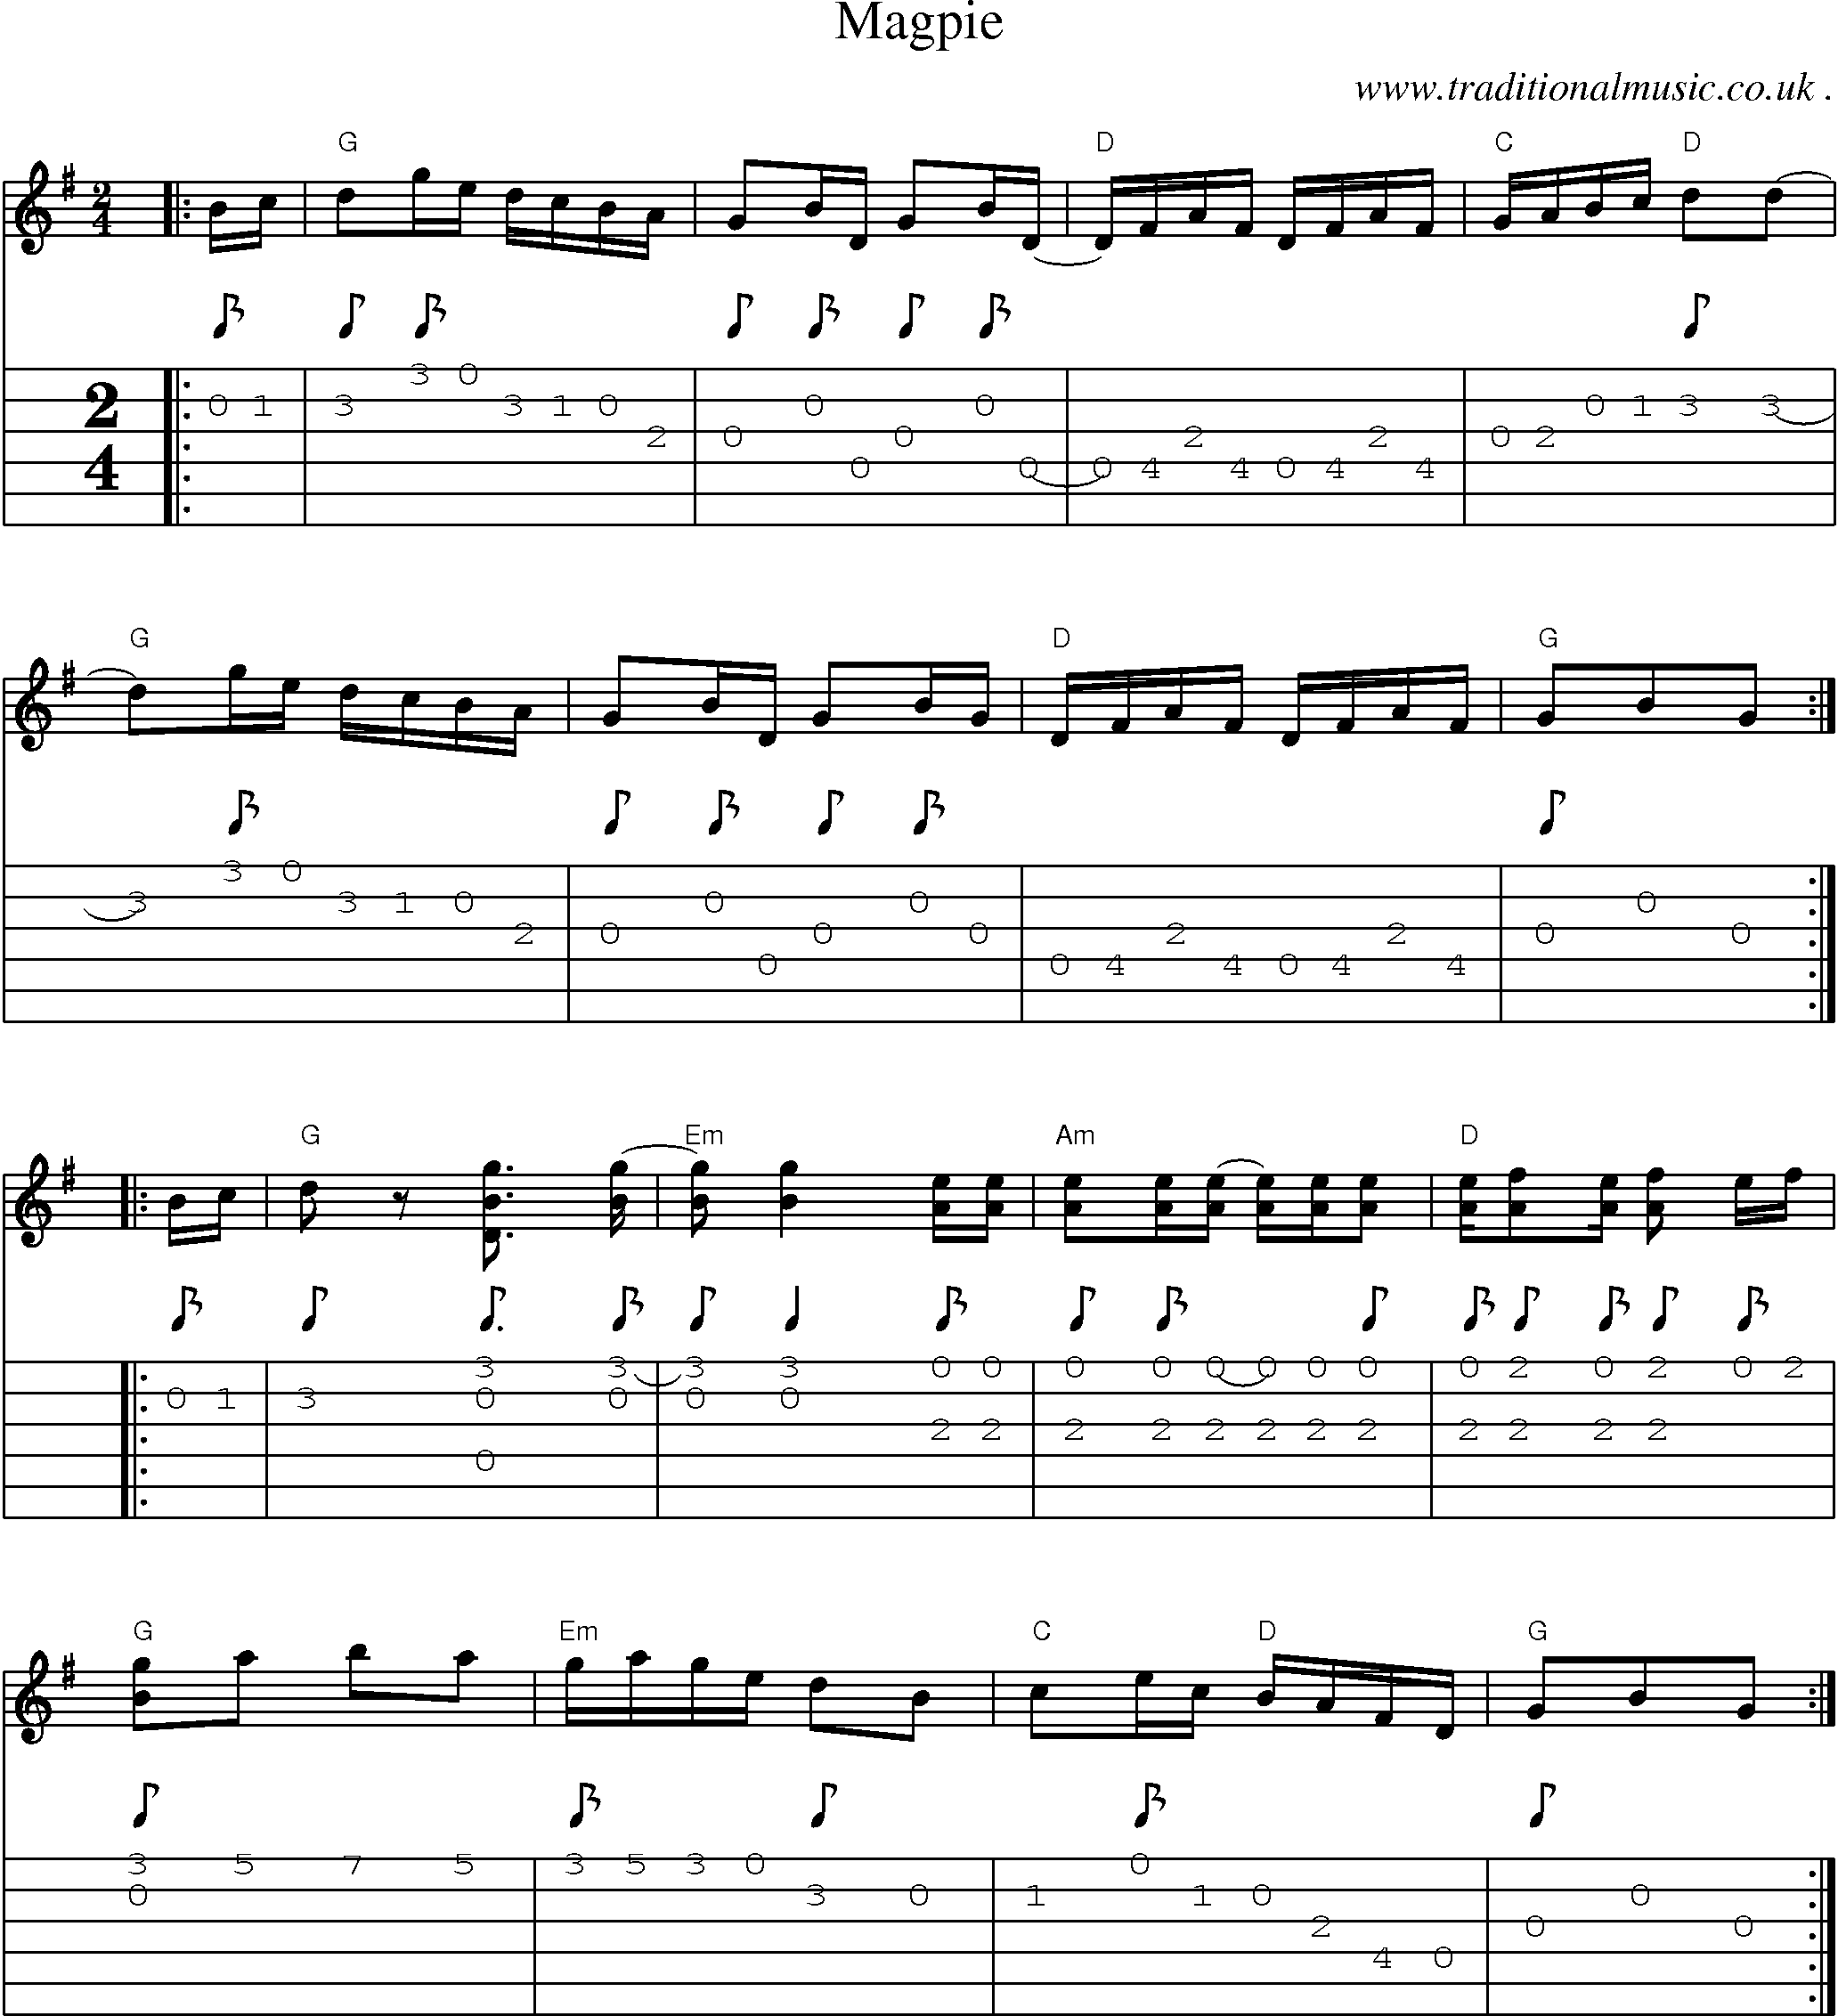 Music Score and Guitar Tabs for Magpie